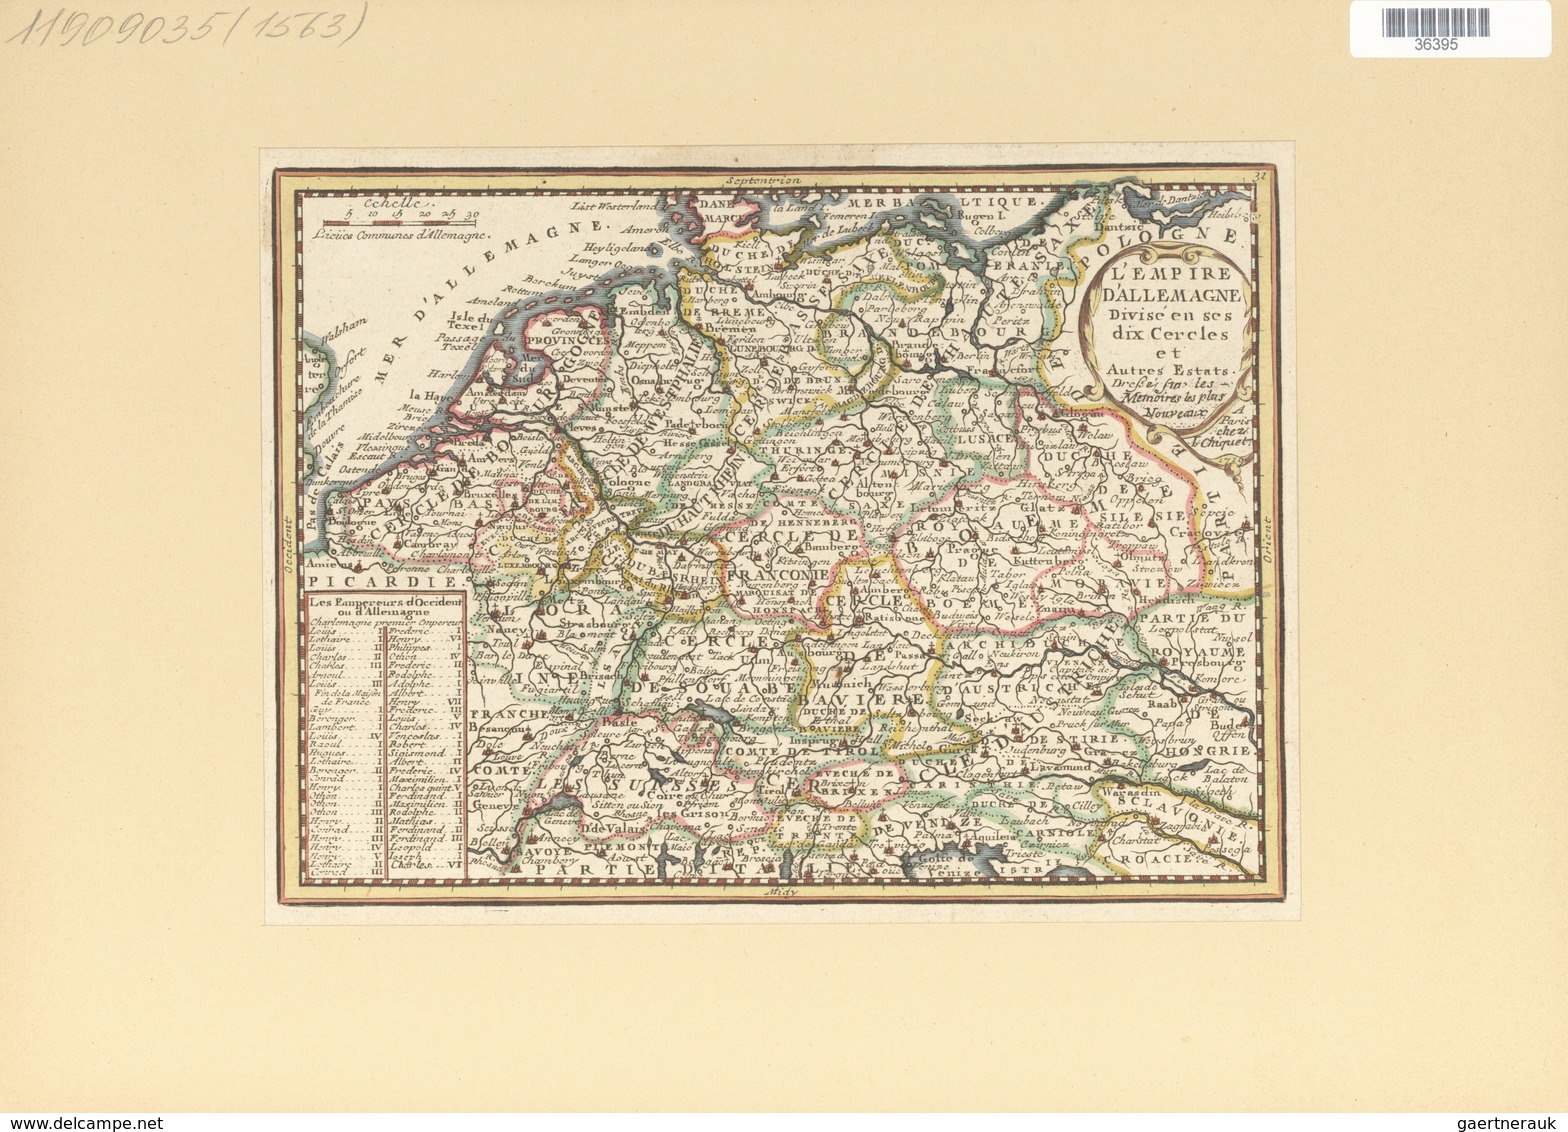 Landkarten Und Stiche: 1719. Map Of The Kingdoms Of Germania From The Low Countries To Hungary. From - Aardrijkskunde